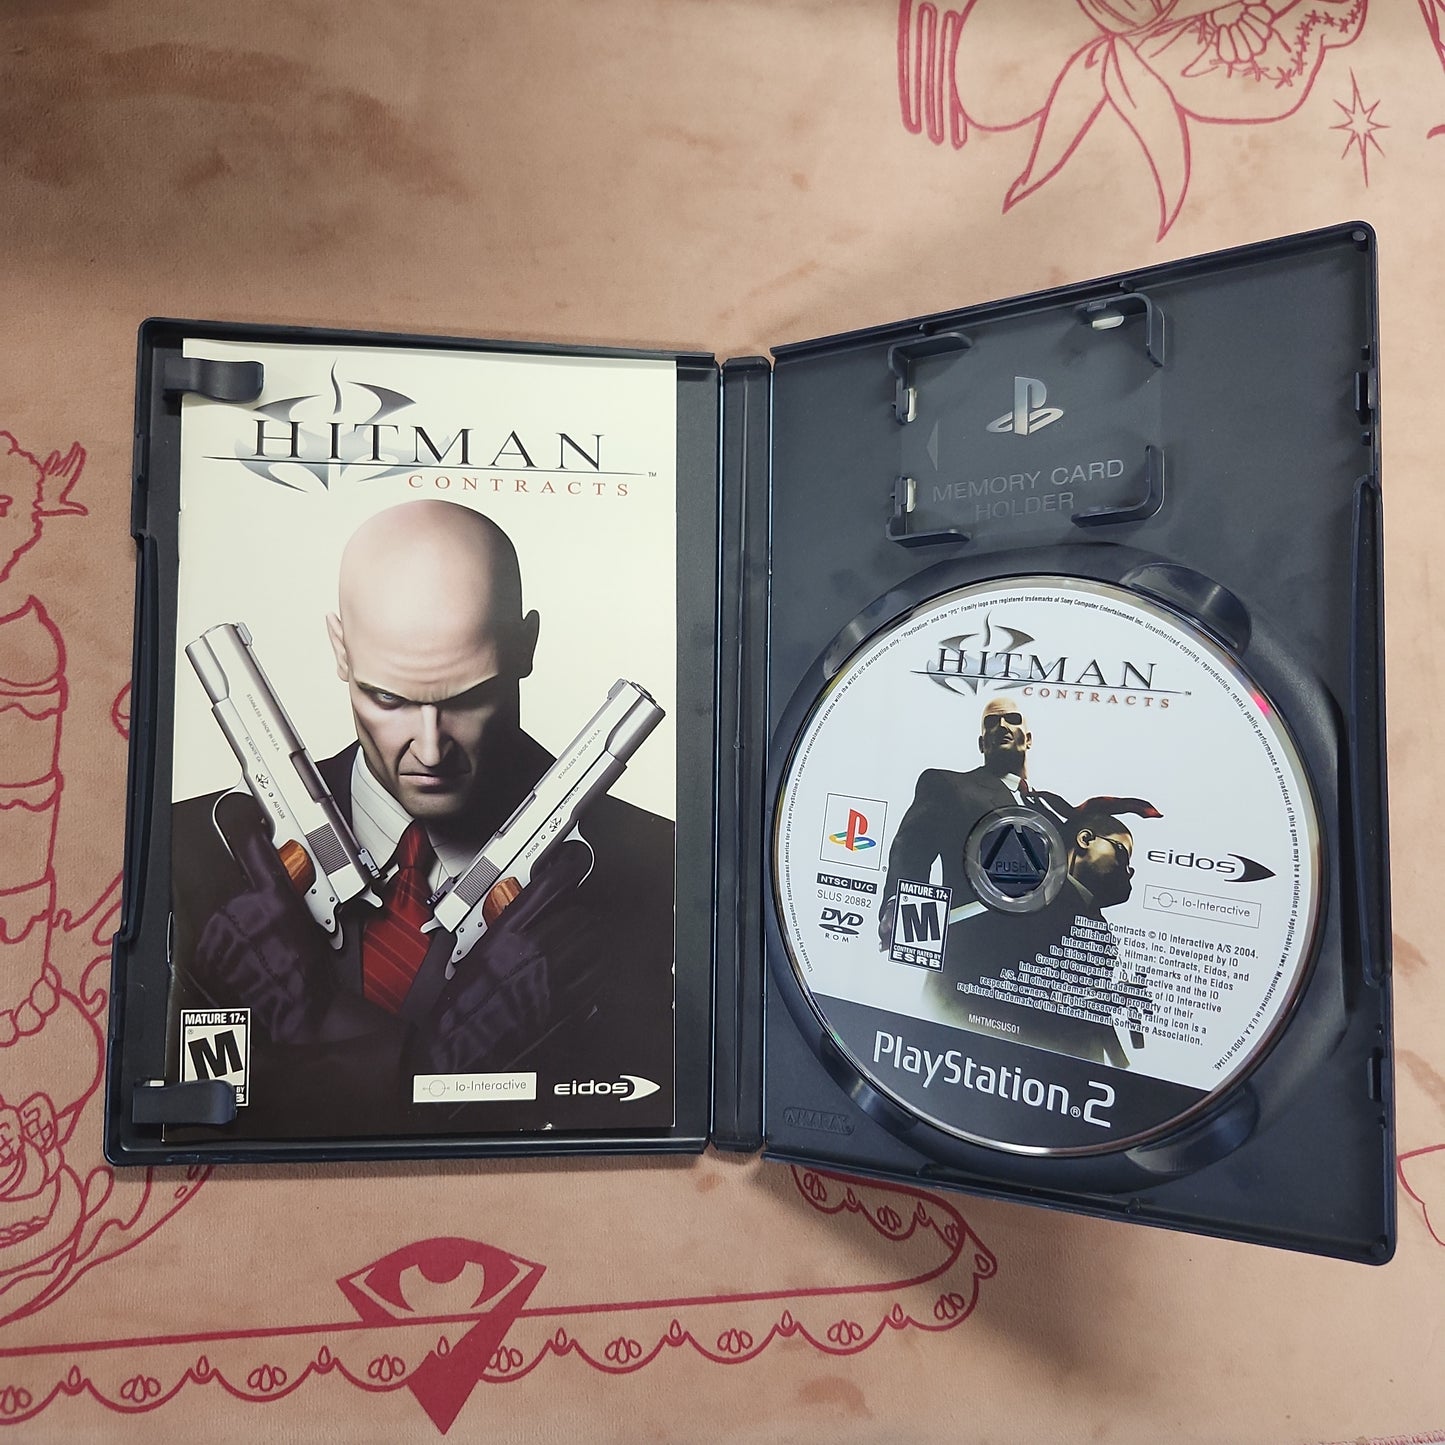 Hitman: Contracts - Playstation 2 (Complete)